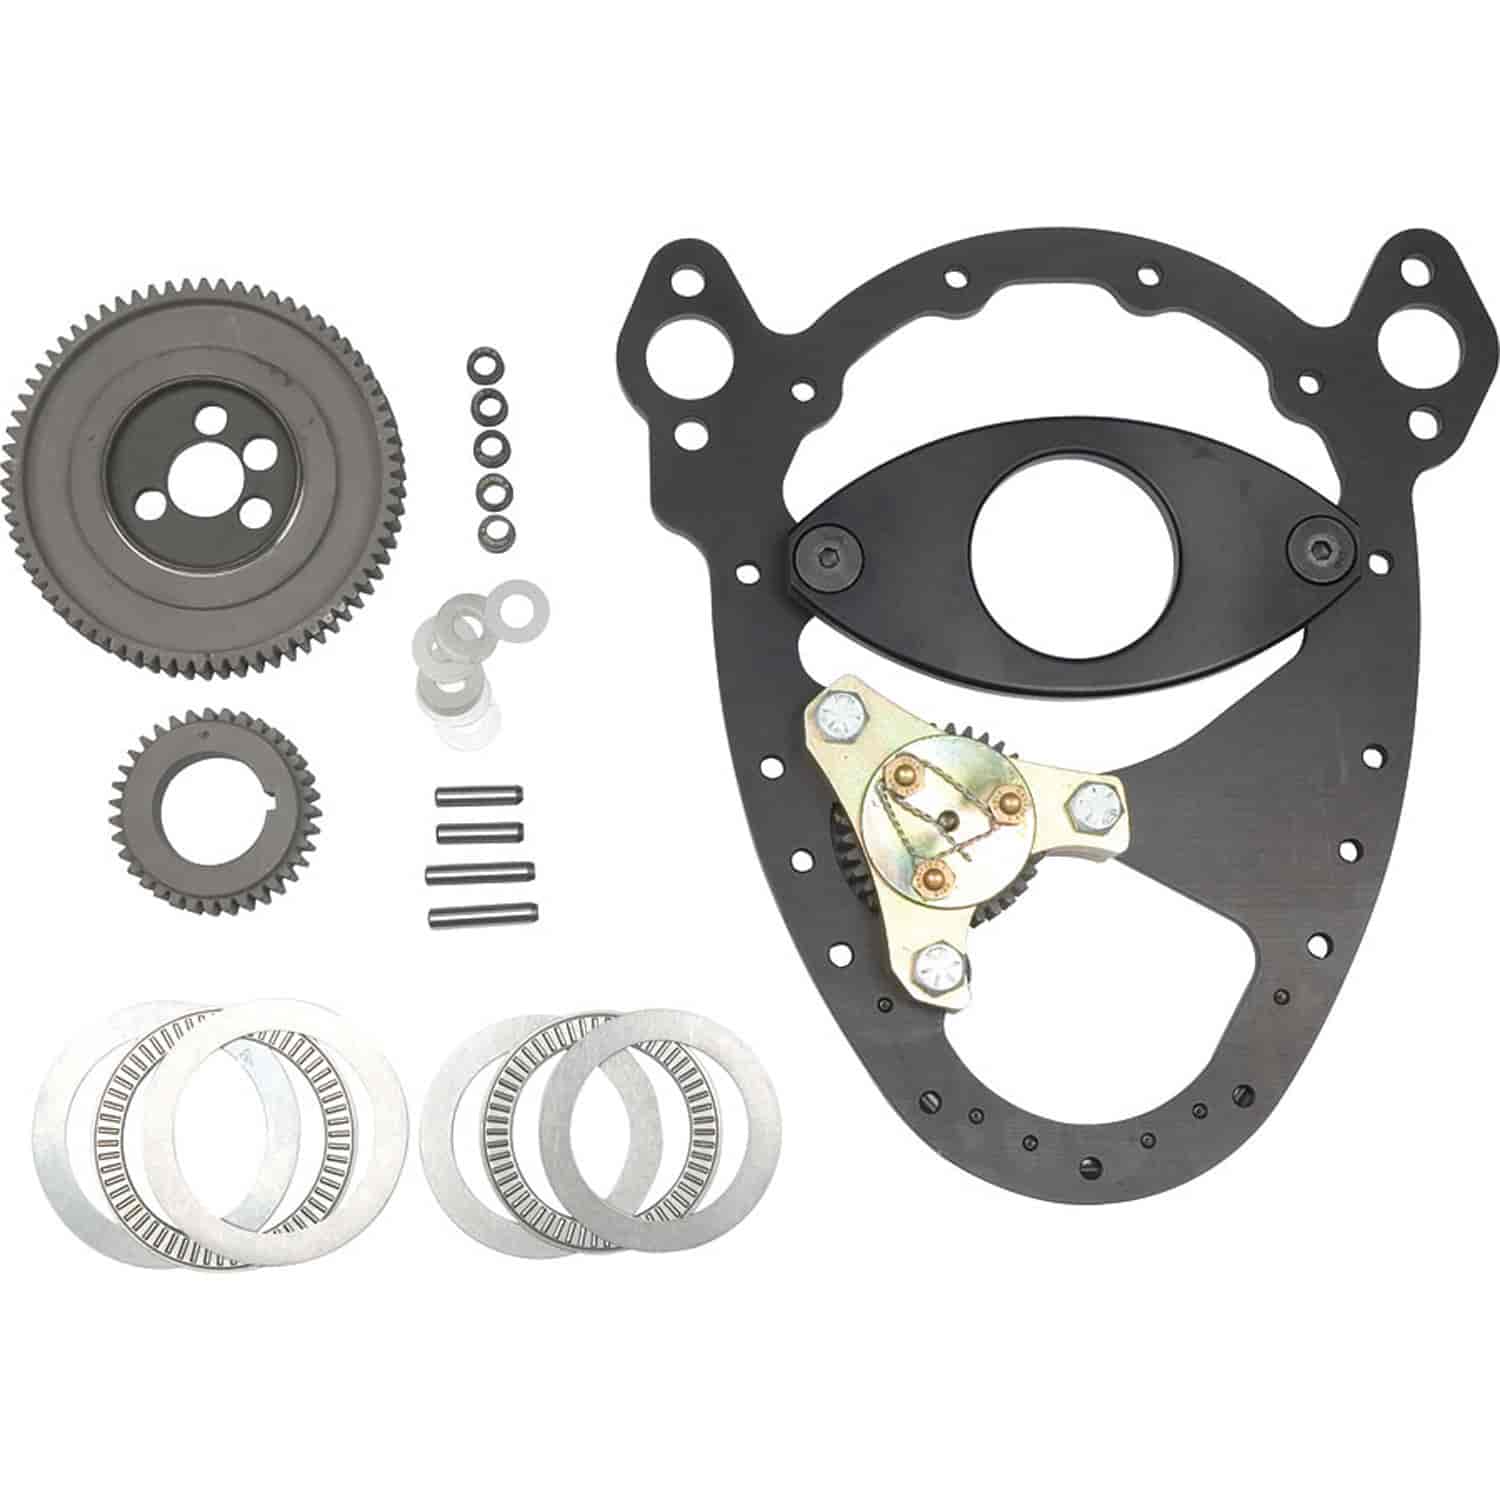 Aluminum Gear Drive Assembly SB Chevy